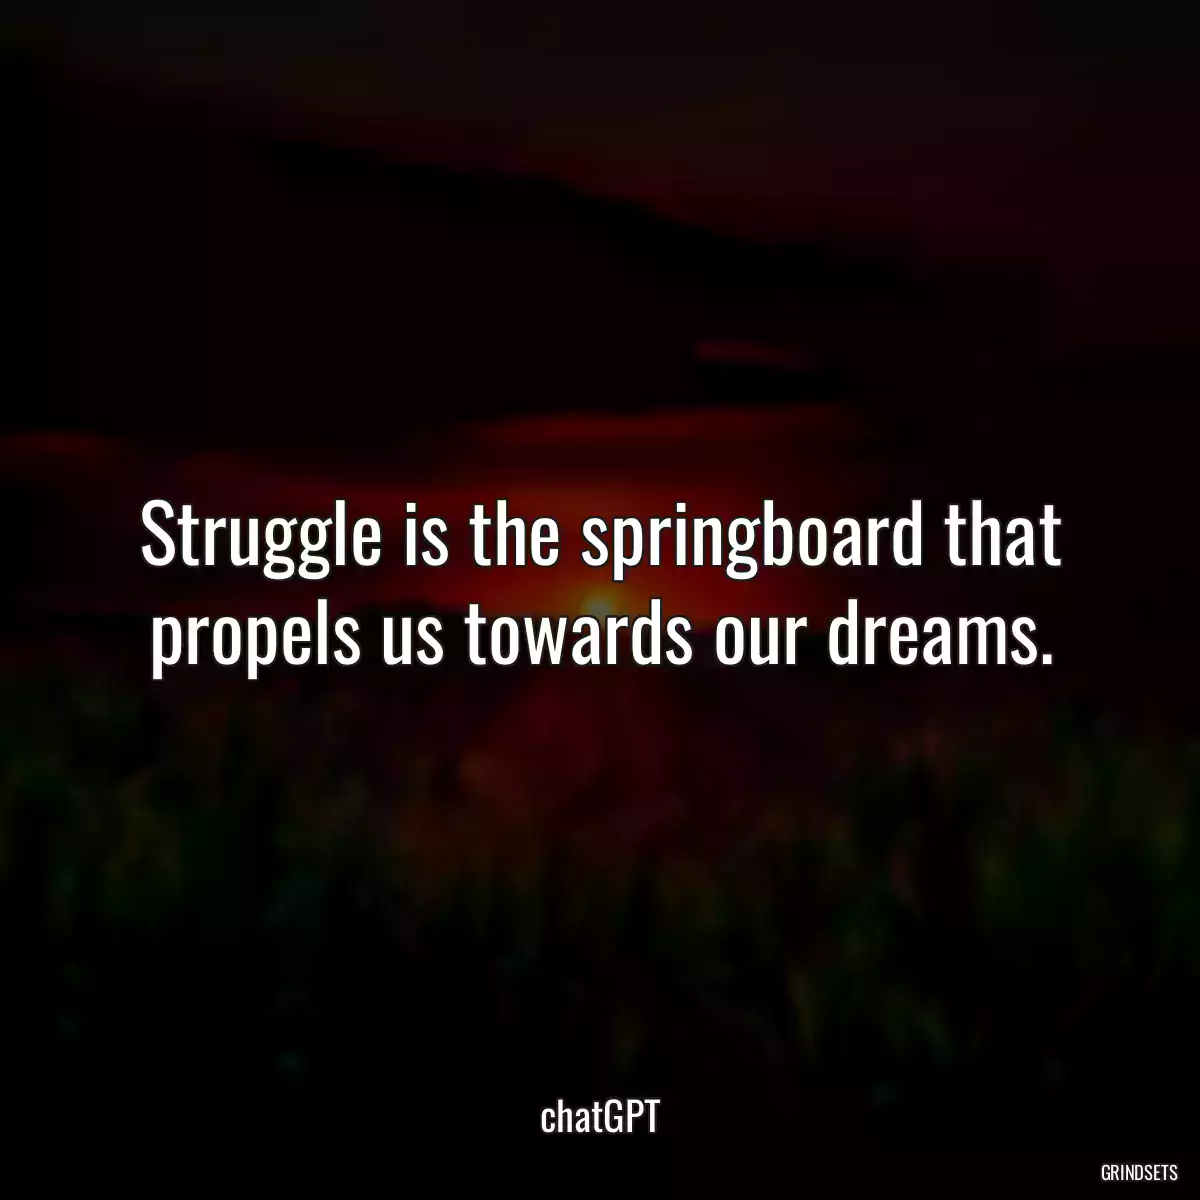 Struggle is the springboard that propels us towards our dreams.